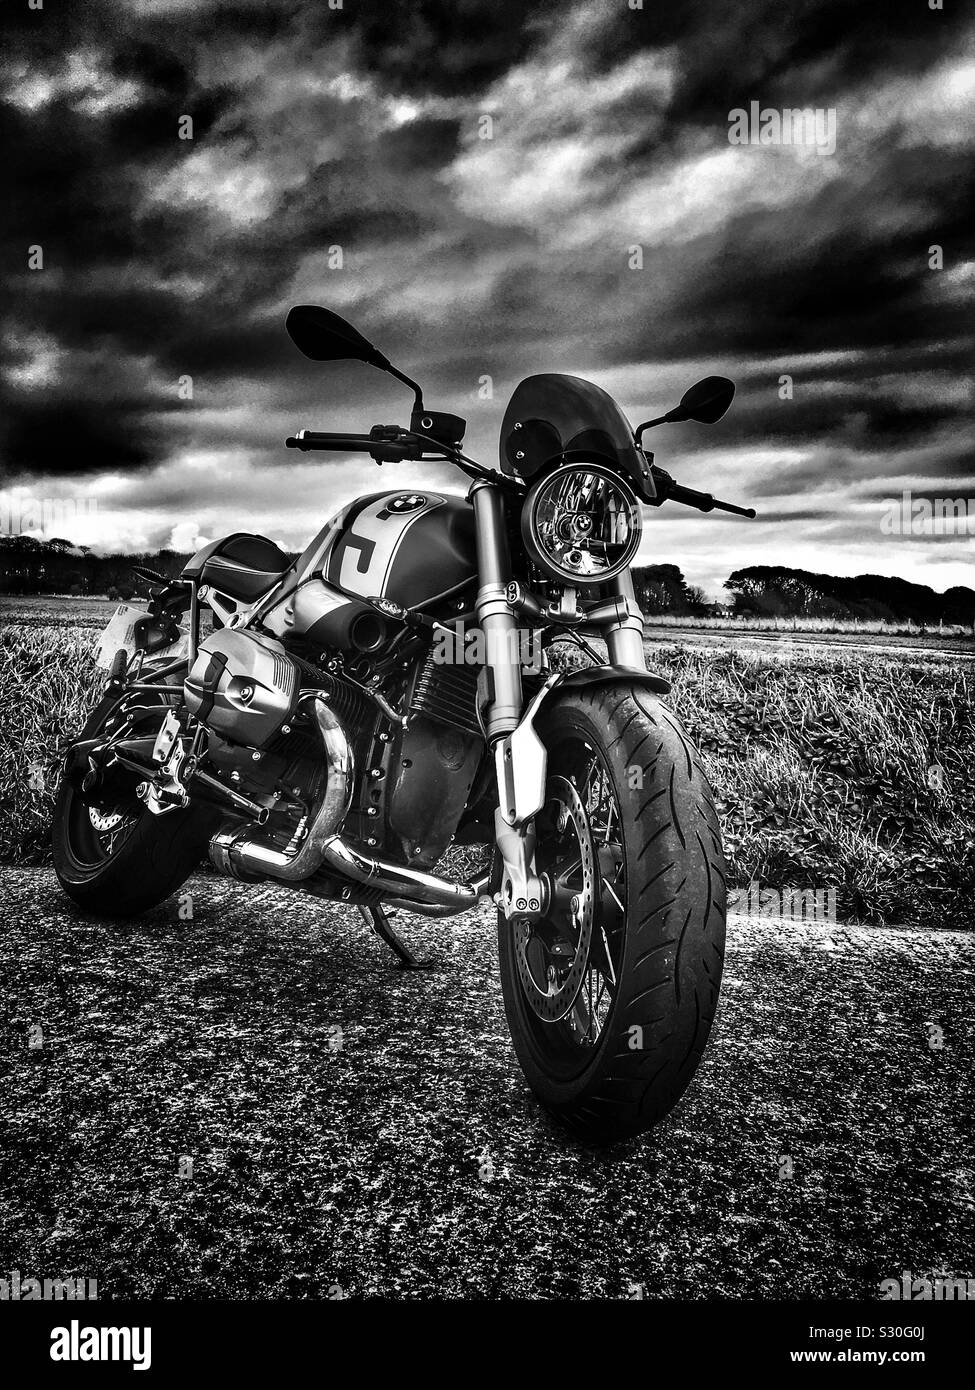 Bmw r nine t 719 special retro hipster cafe racer Stock Photo